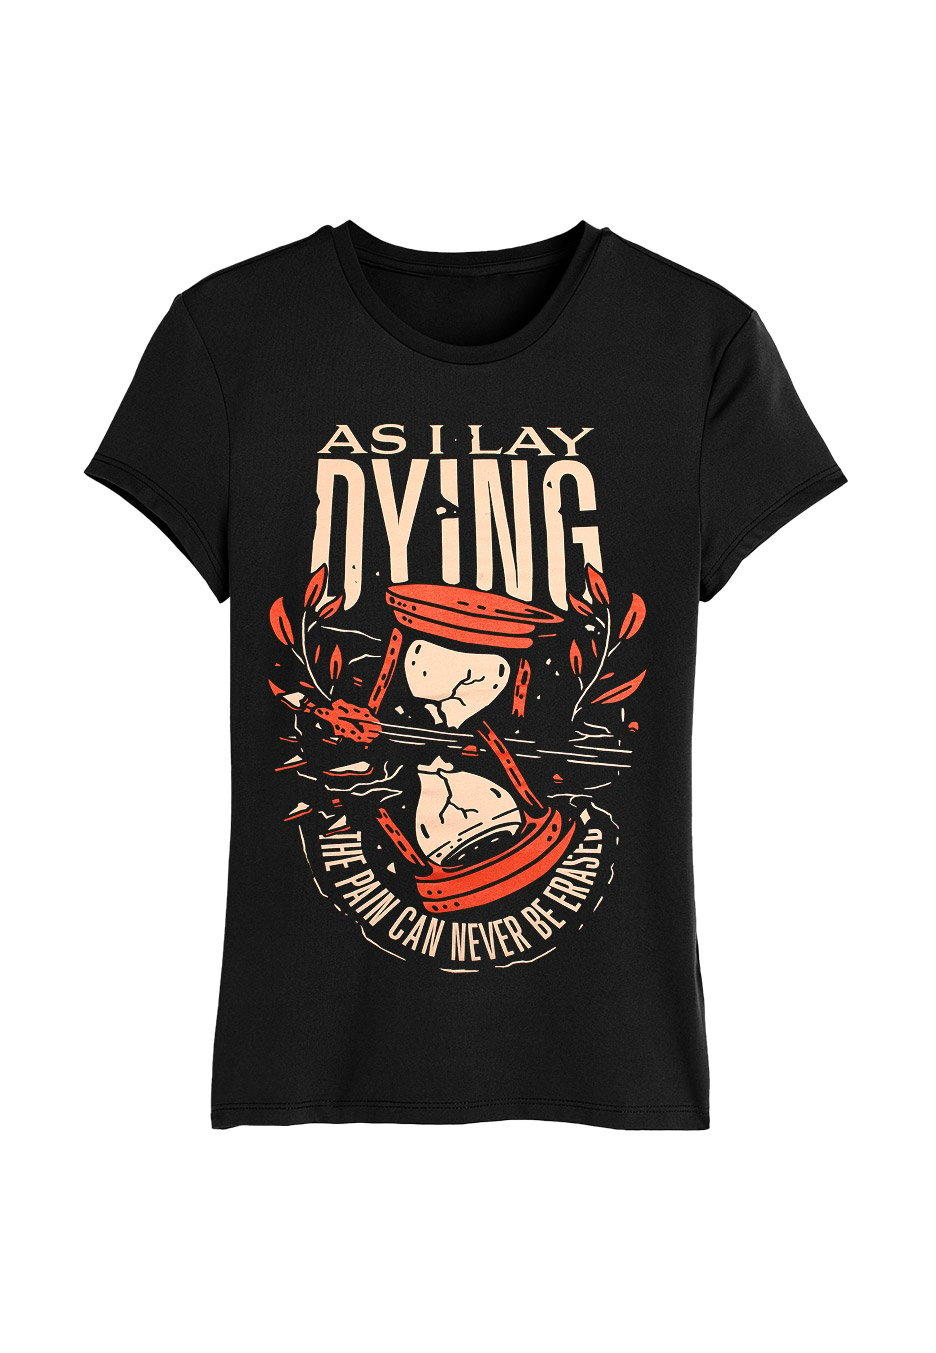 As I Lay Dying - Hourglass - Girly